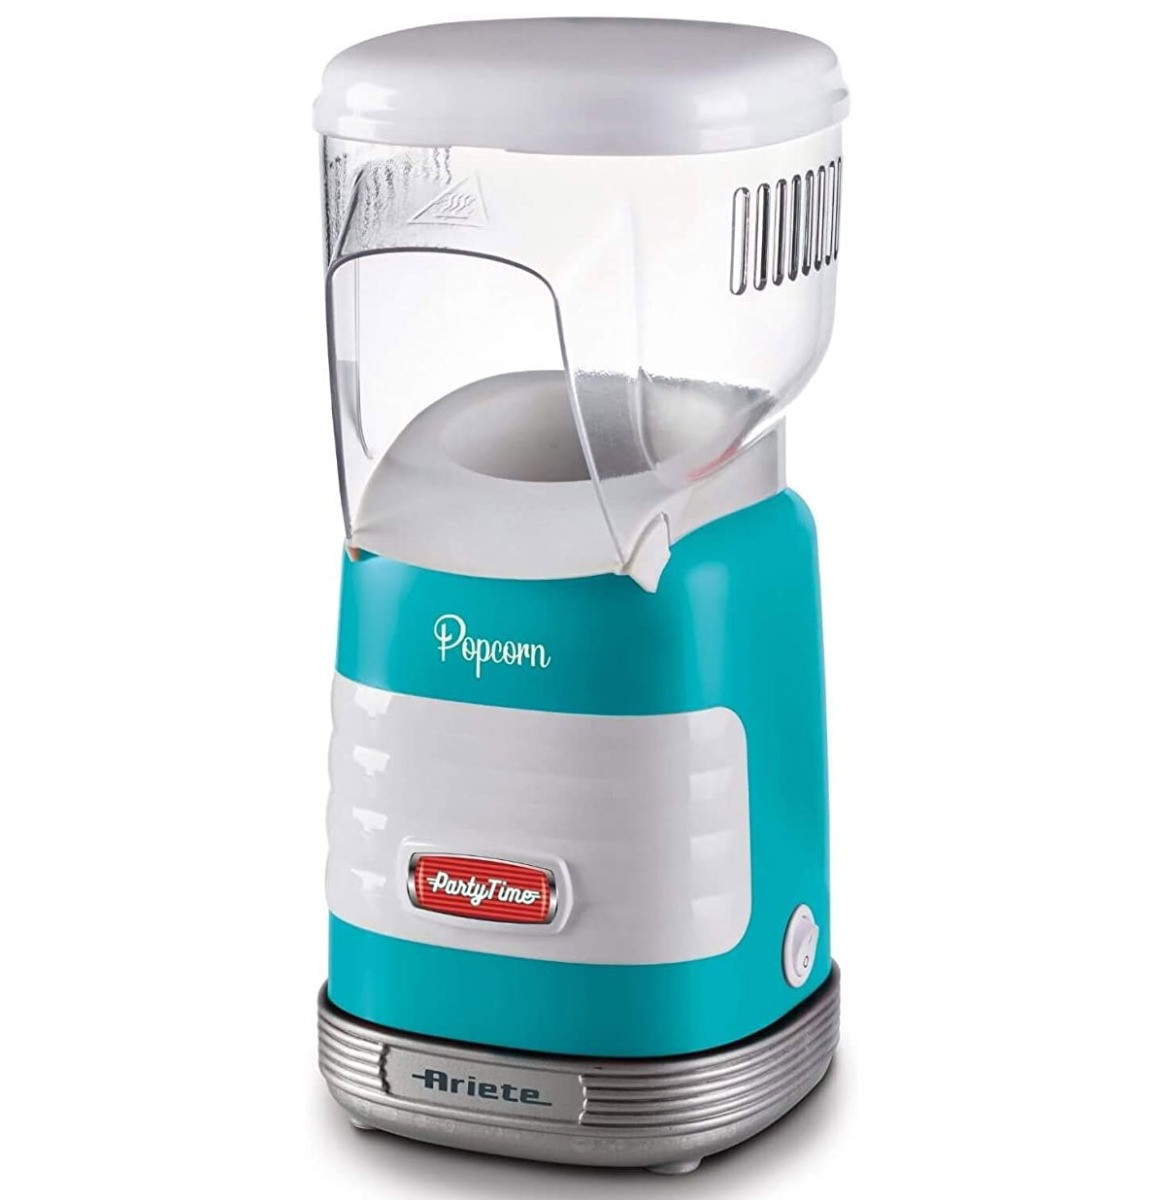 Ariete Popcorn Machine Party Time - Turquoise